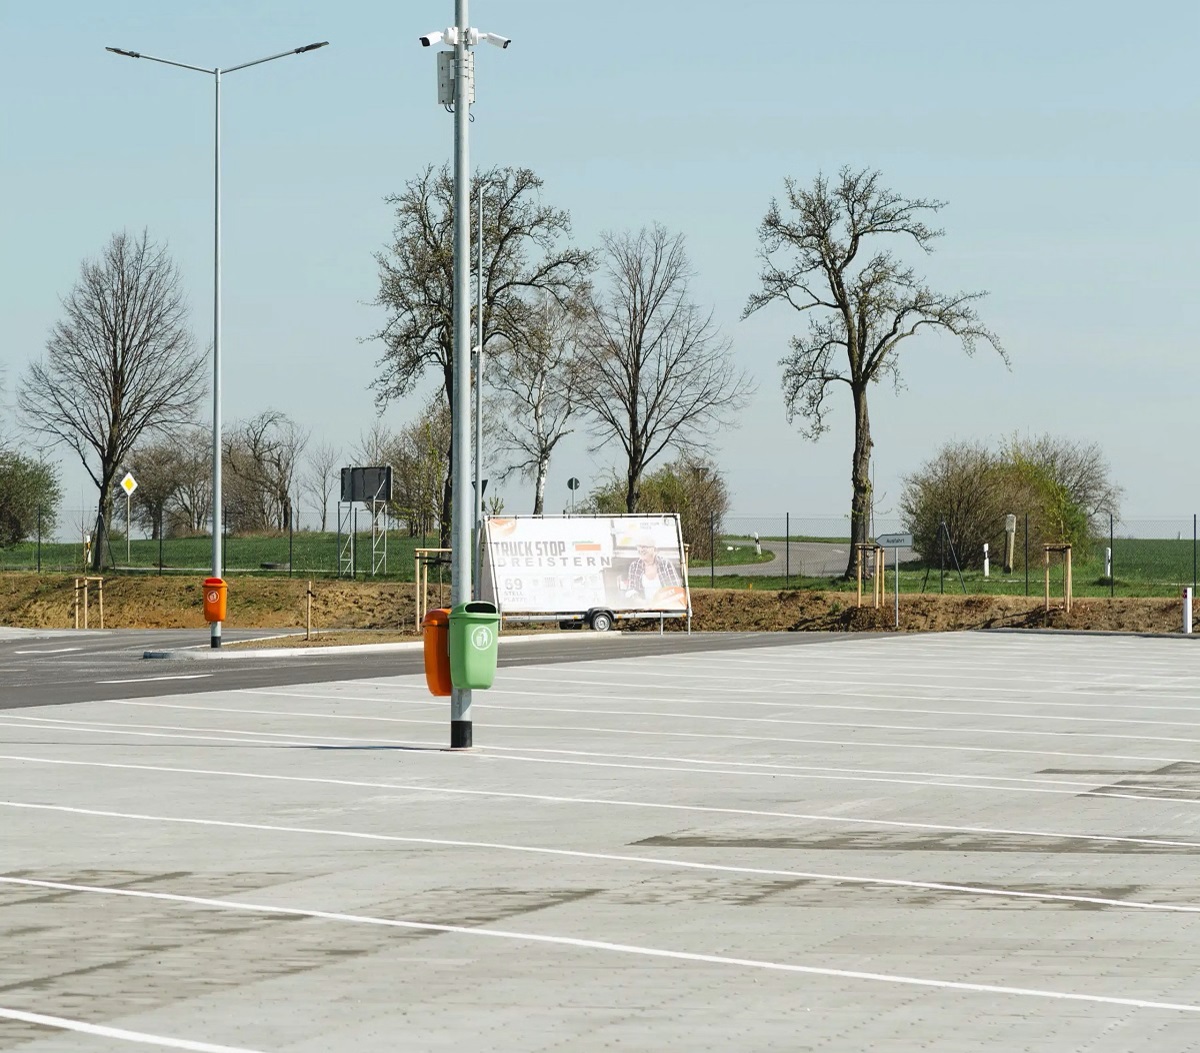 By setting up new "Park Your Truck" truck parking spaces in unused areas within a community, illegal parking can be avoided and the amount of waste reduced.